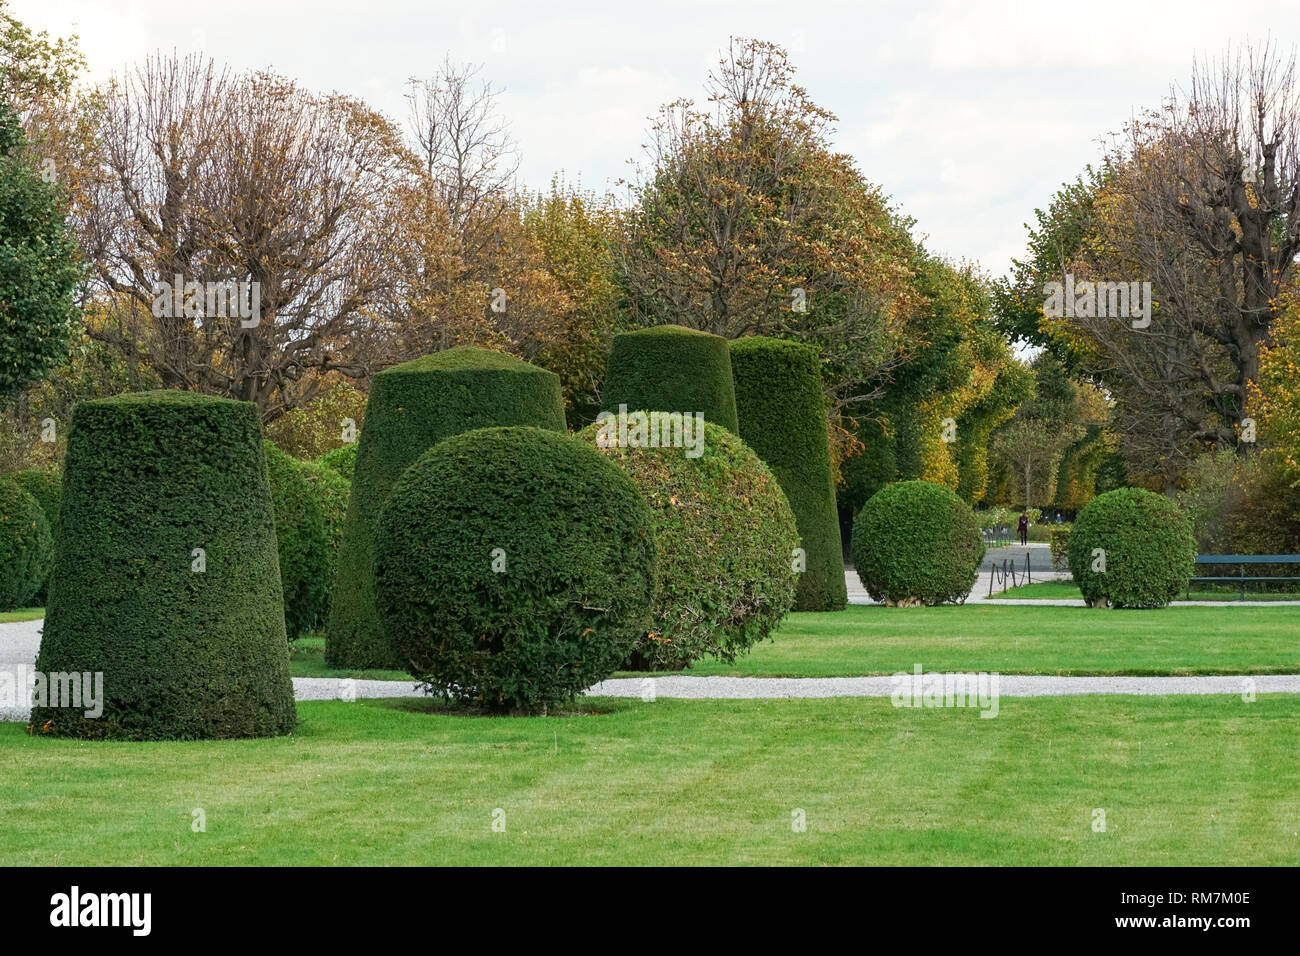 Trimmed and shaped shrubs in the Schönbrunn Palace gardens in Vienna, Austria Stock Photo